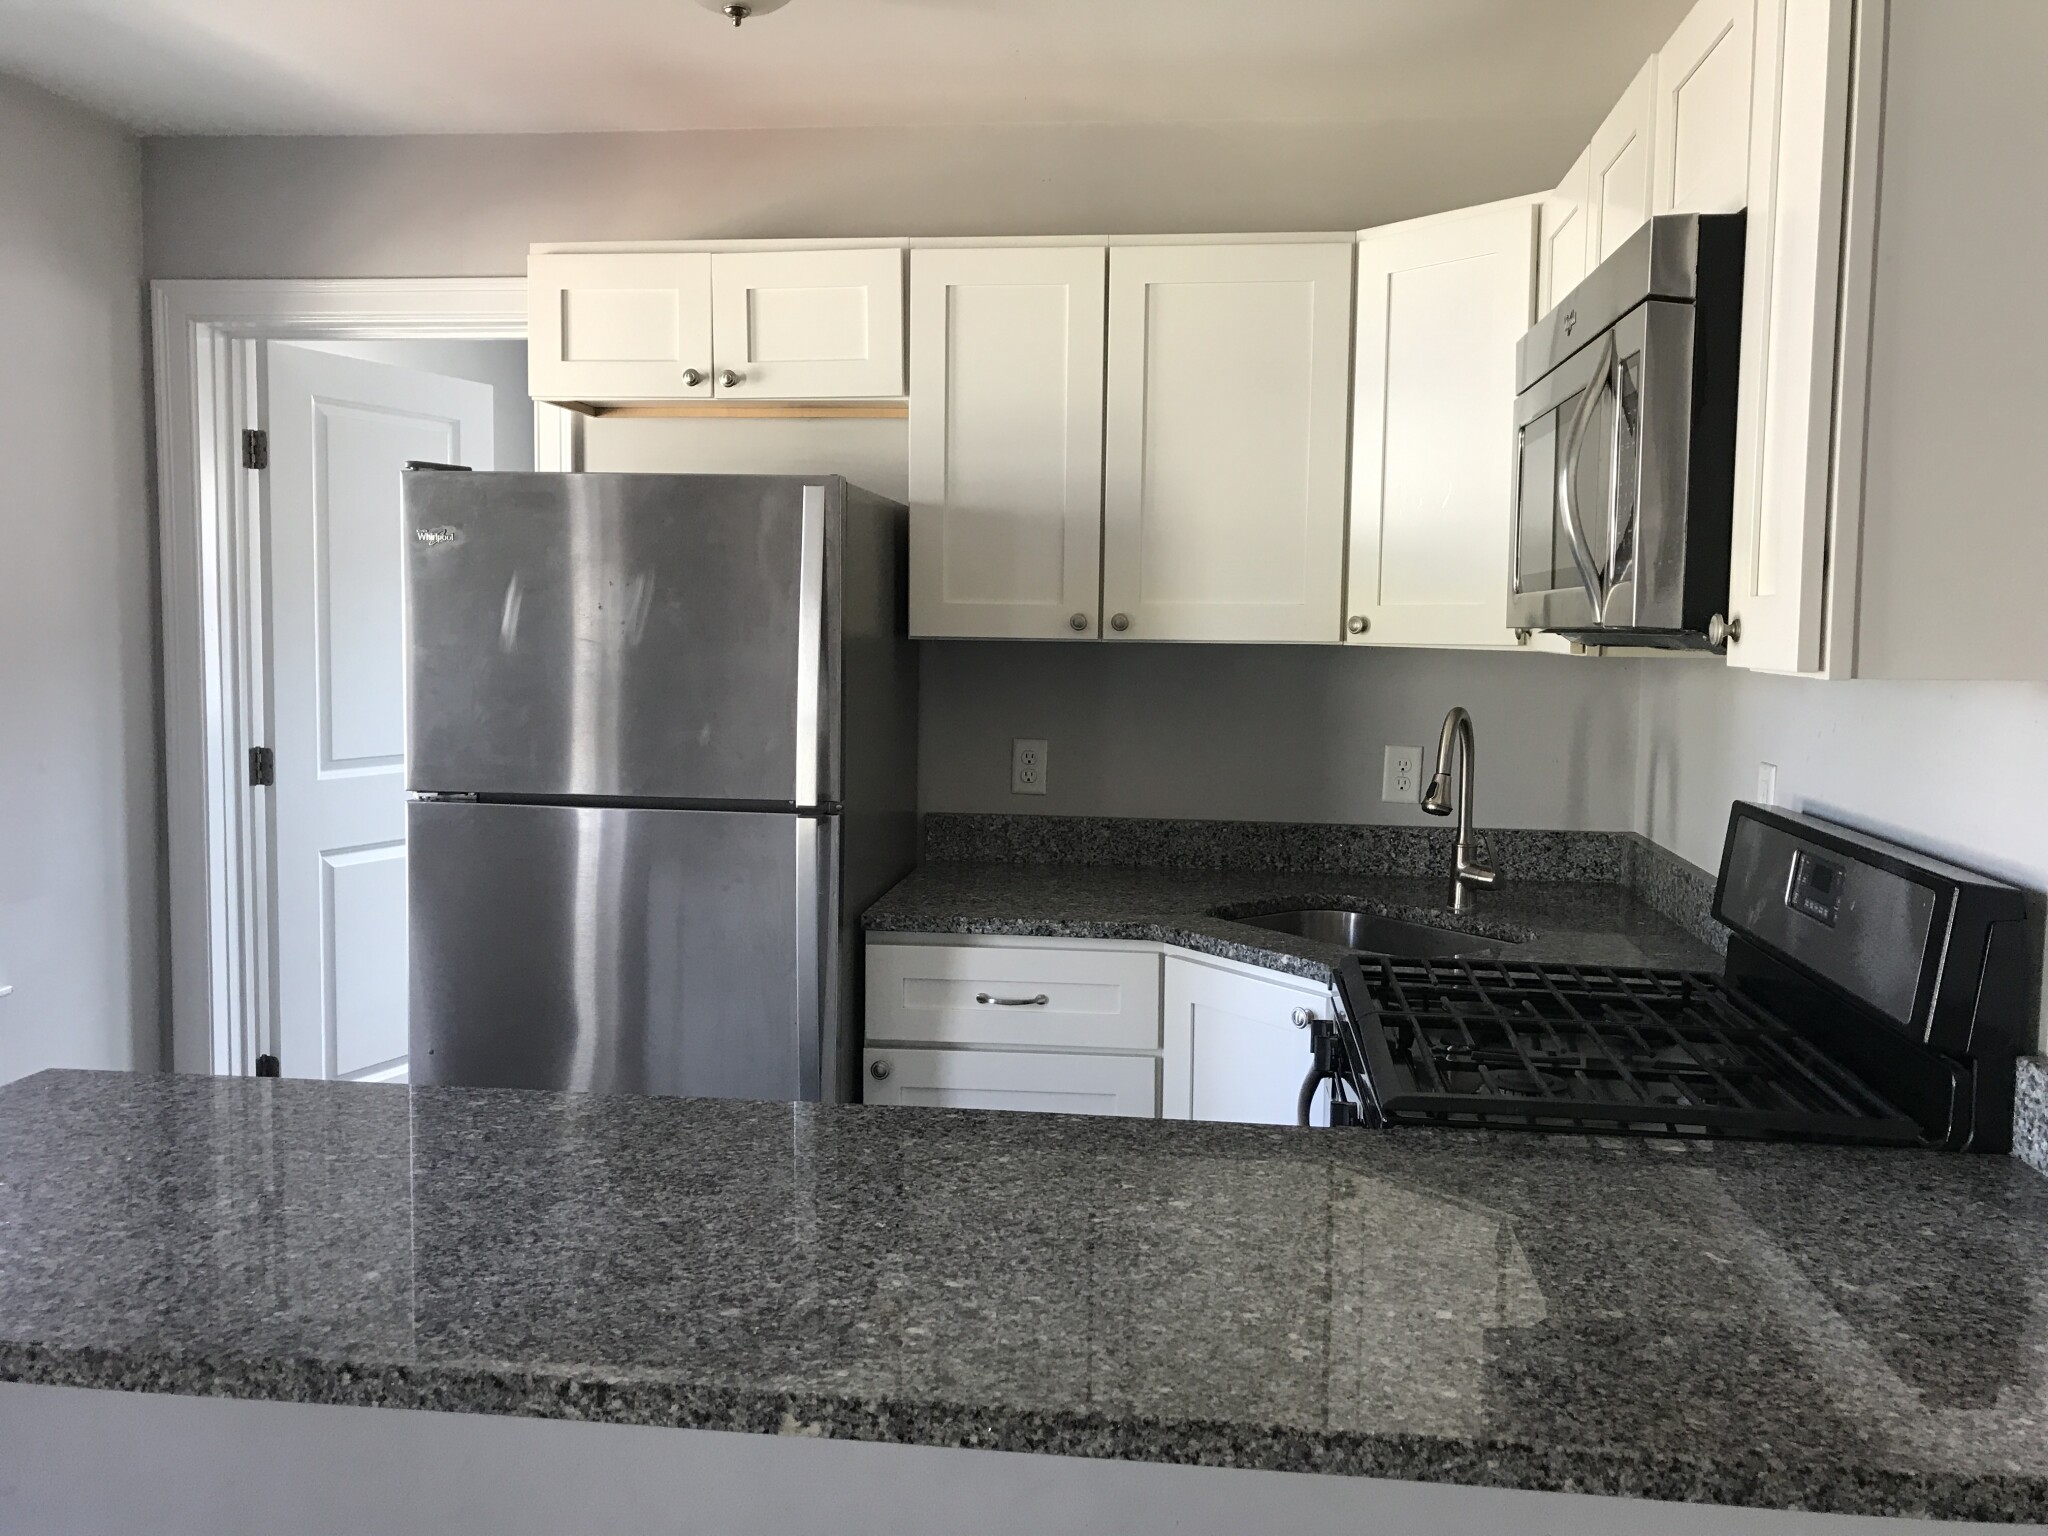 Photos of apartment on Hancock St.,Quincy MA 02170